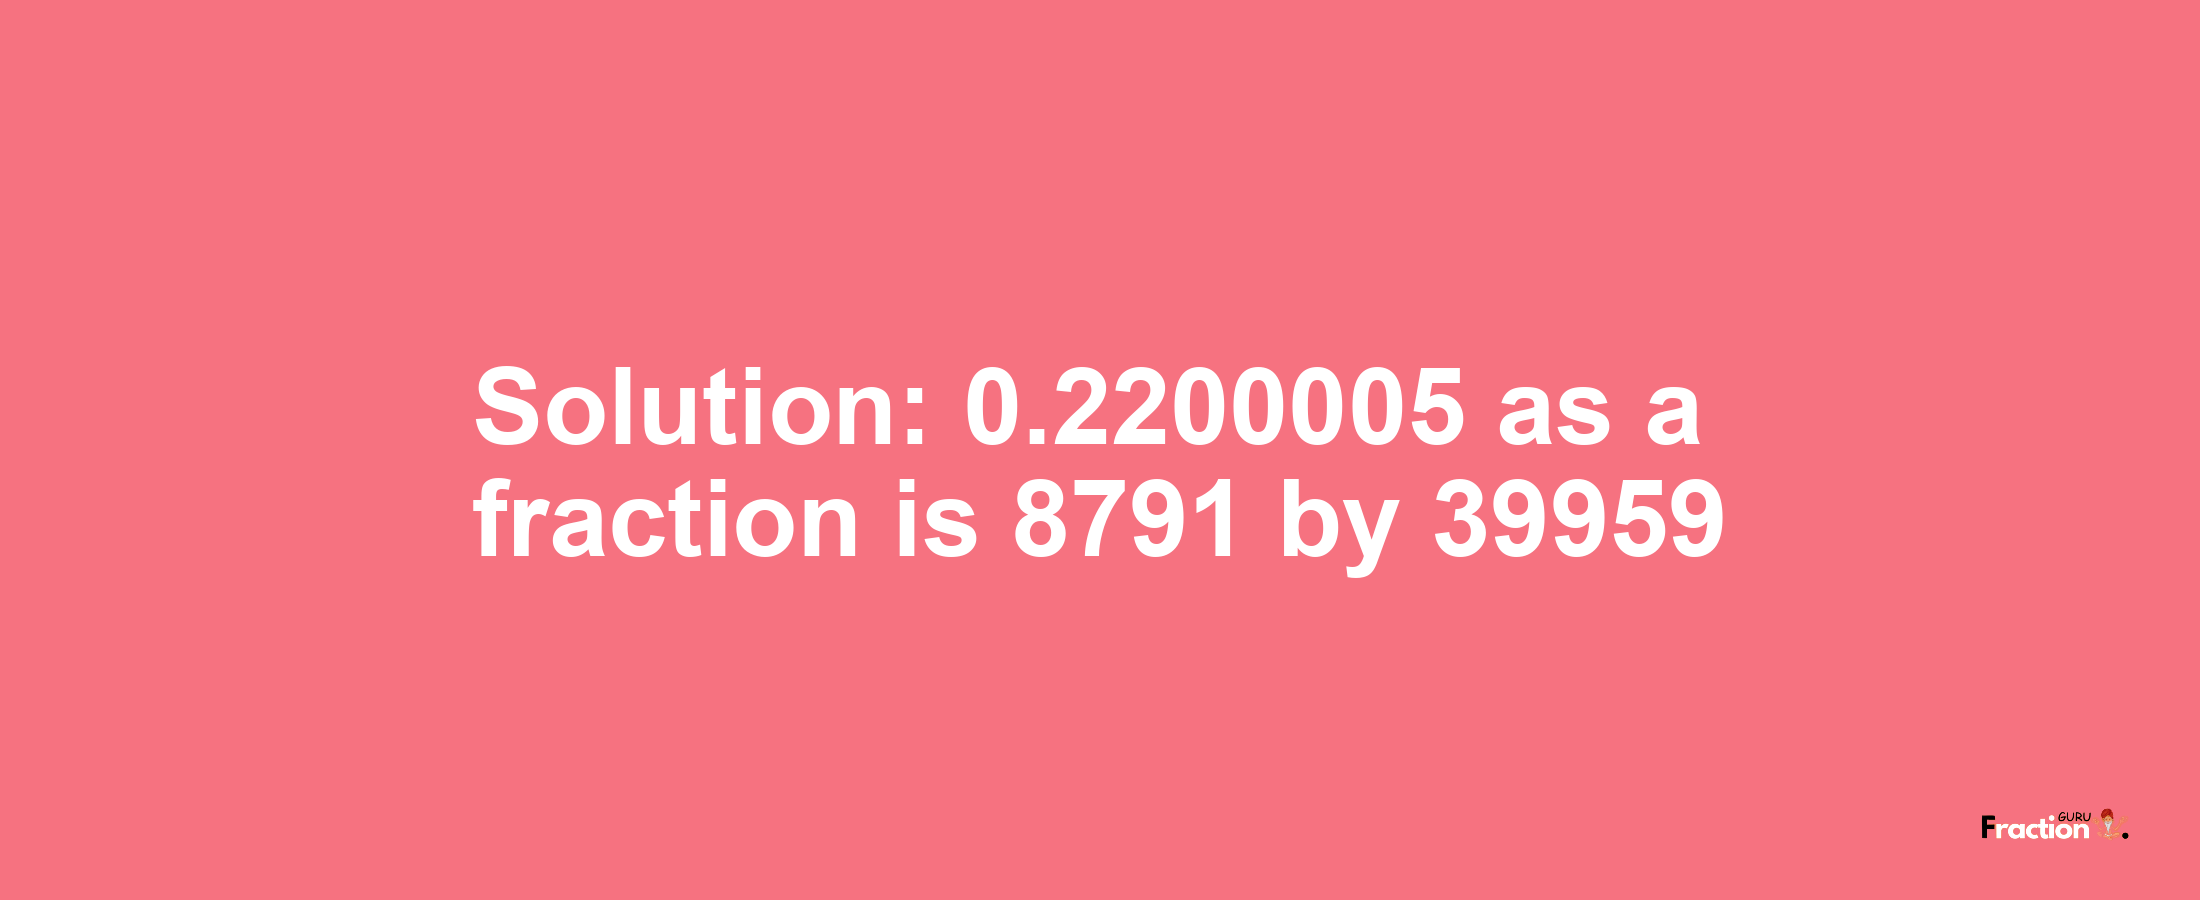 Solution:0.2200005 as a fraction is 8791/39959